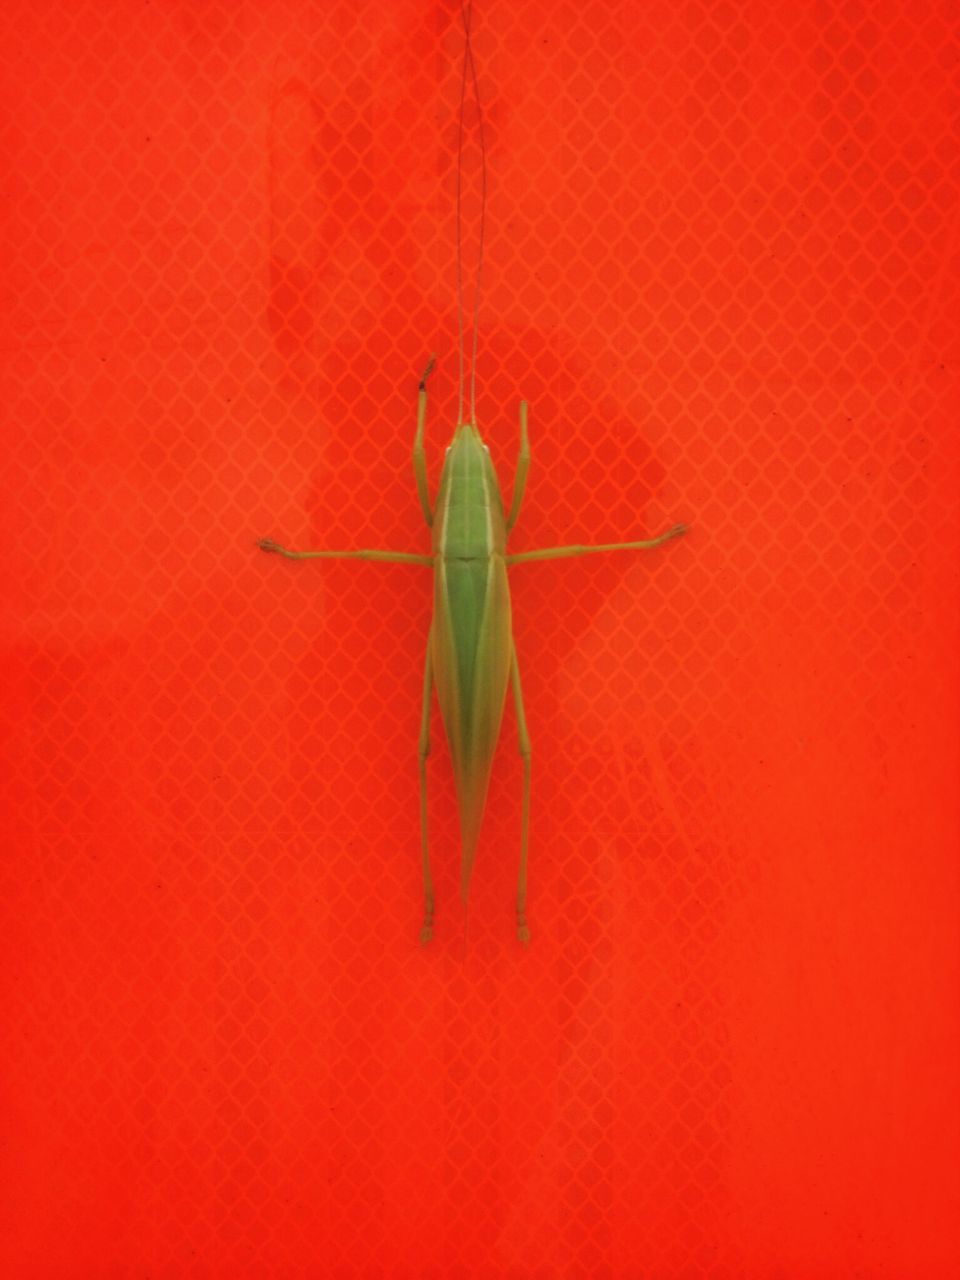 red, insect, one animal, wall - building feature, close-up, leaf, animal themes, wildlife, animals in the wild, high angle view, green color, studio shot, no people, single object, copy space, wall, nature, day, orange color, textured